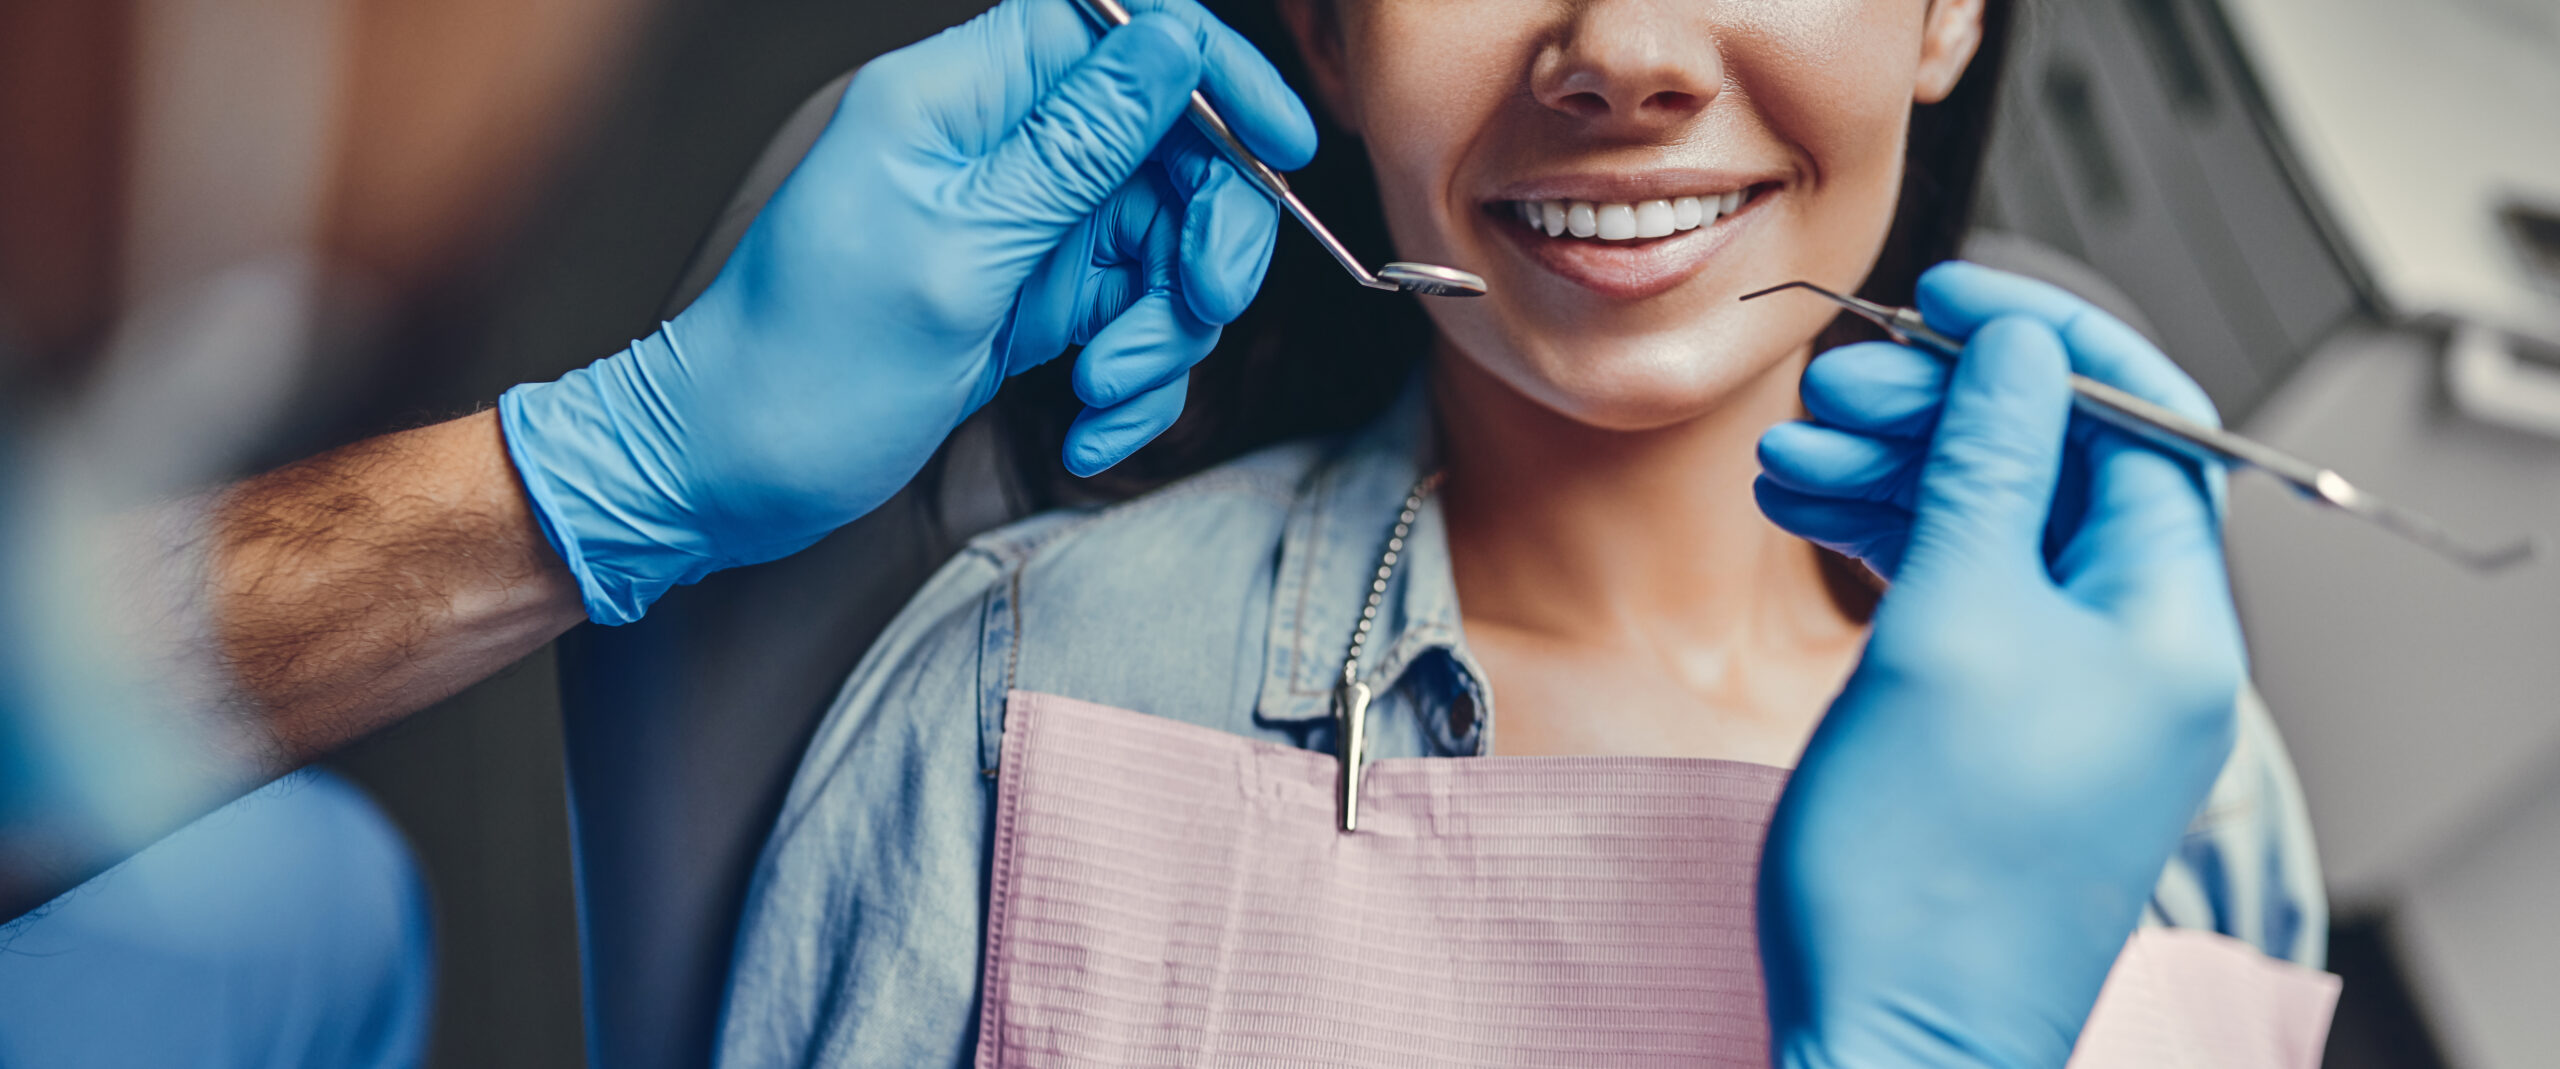  Find A Dentist You Can Trust in 5 Easy Steps